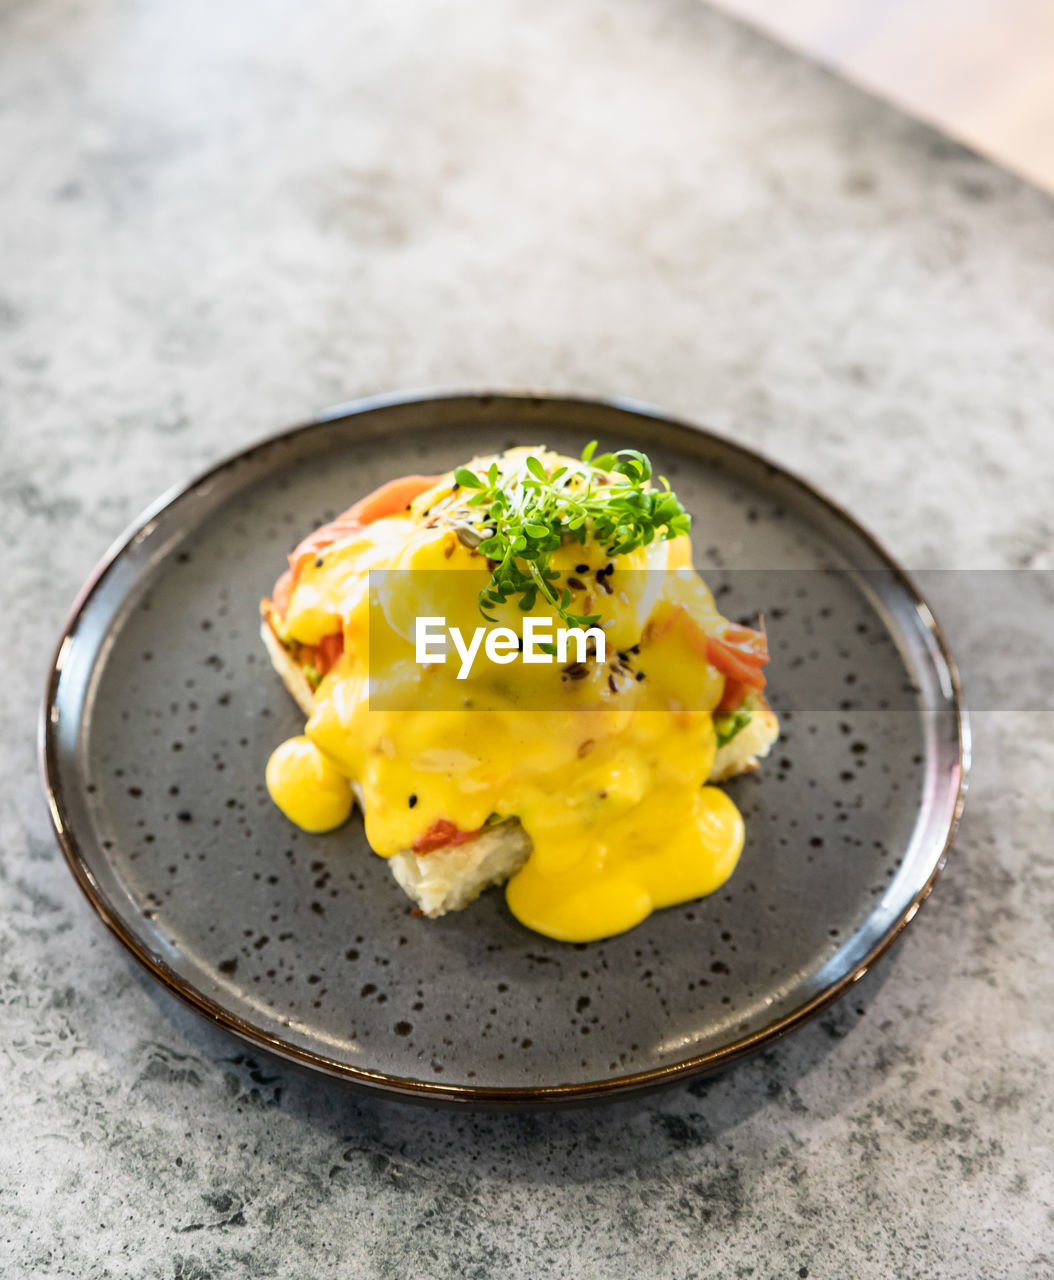 food and drink, food, healthy eating, egg, dish, wellbeing, freshness, egg yolk, meal, plate, yellow, produce, no people, indoors, fried, fried egg, studio shot, breakfast, vegetable, close-up, high angle view, kitchen utensil